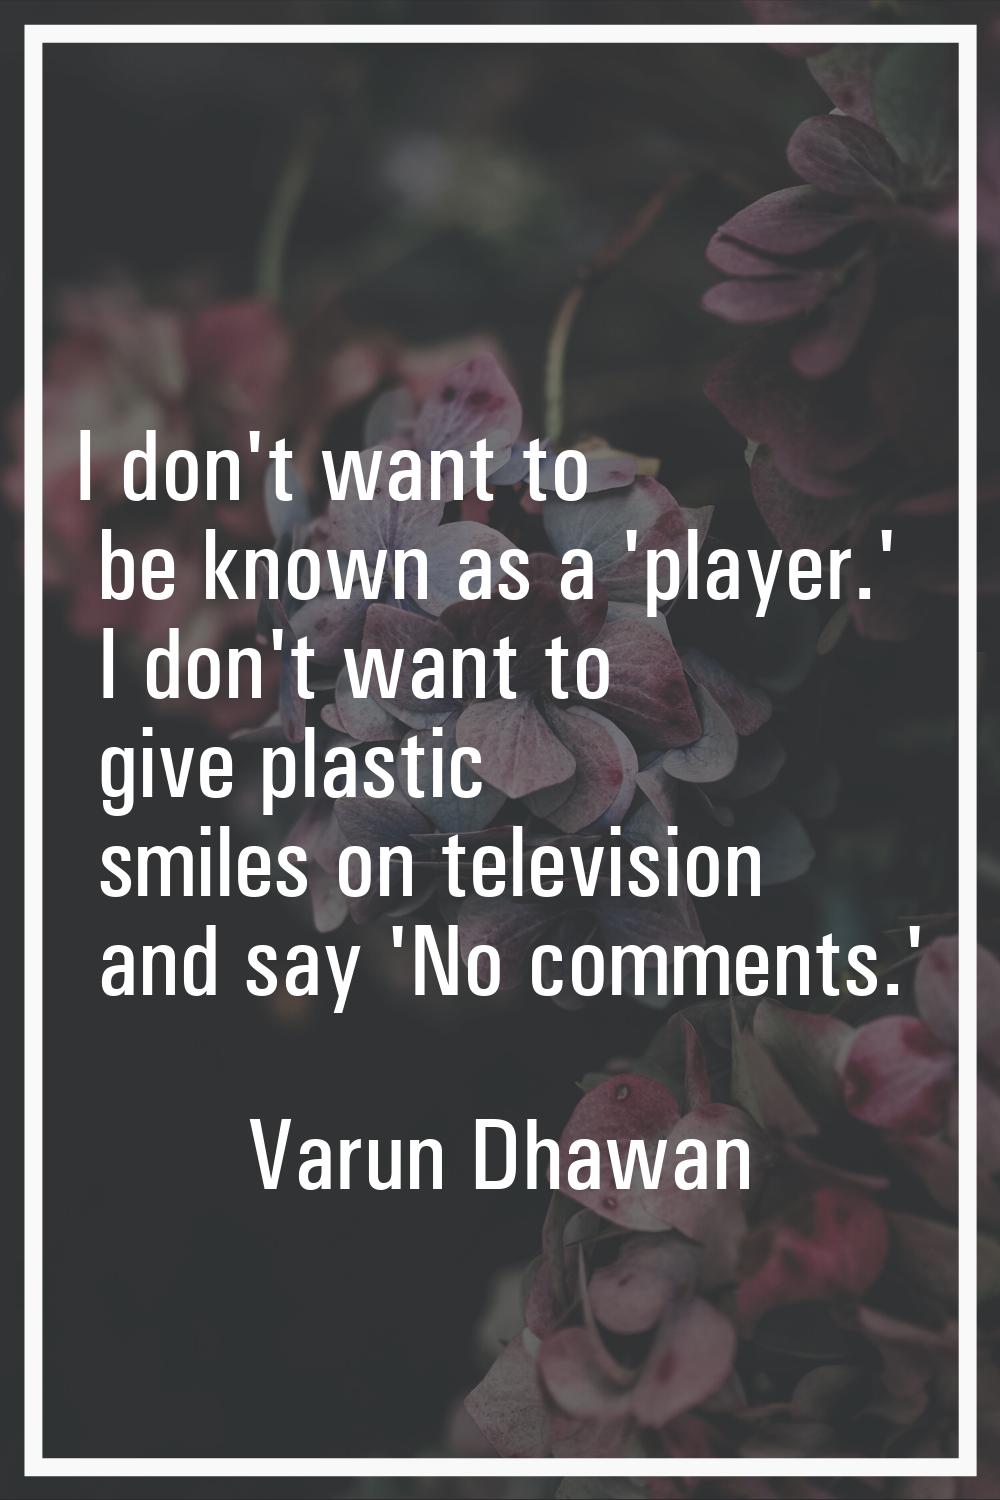 I don't want to be known as a 'player.' I don't want to give plastic smiles on television and say '